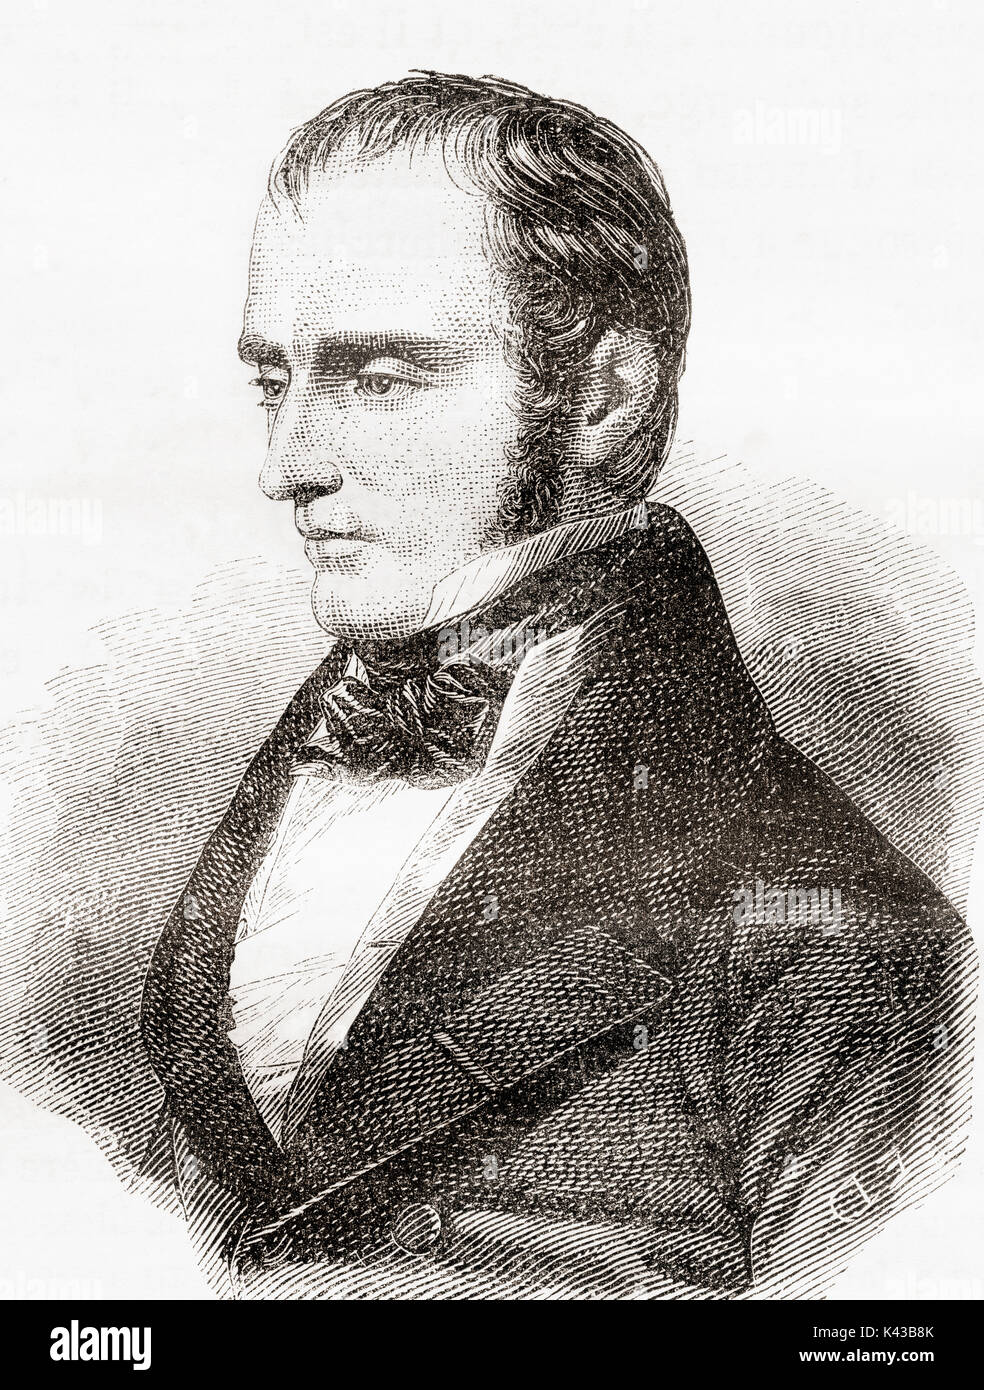 Marie François Xavier Bichat, 1771 – 1802.  French anatomist and pathologist known as the father of histology.  From Les Merveilles de la Science, published 1870. Stock Photo